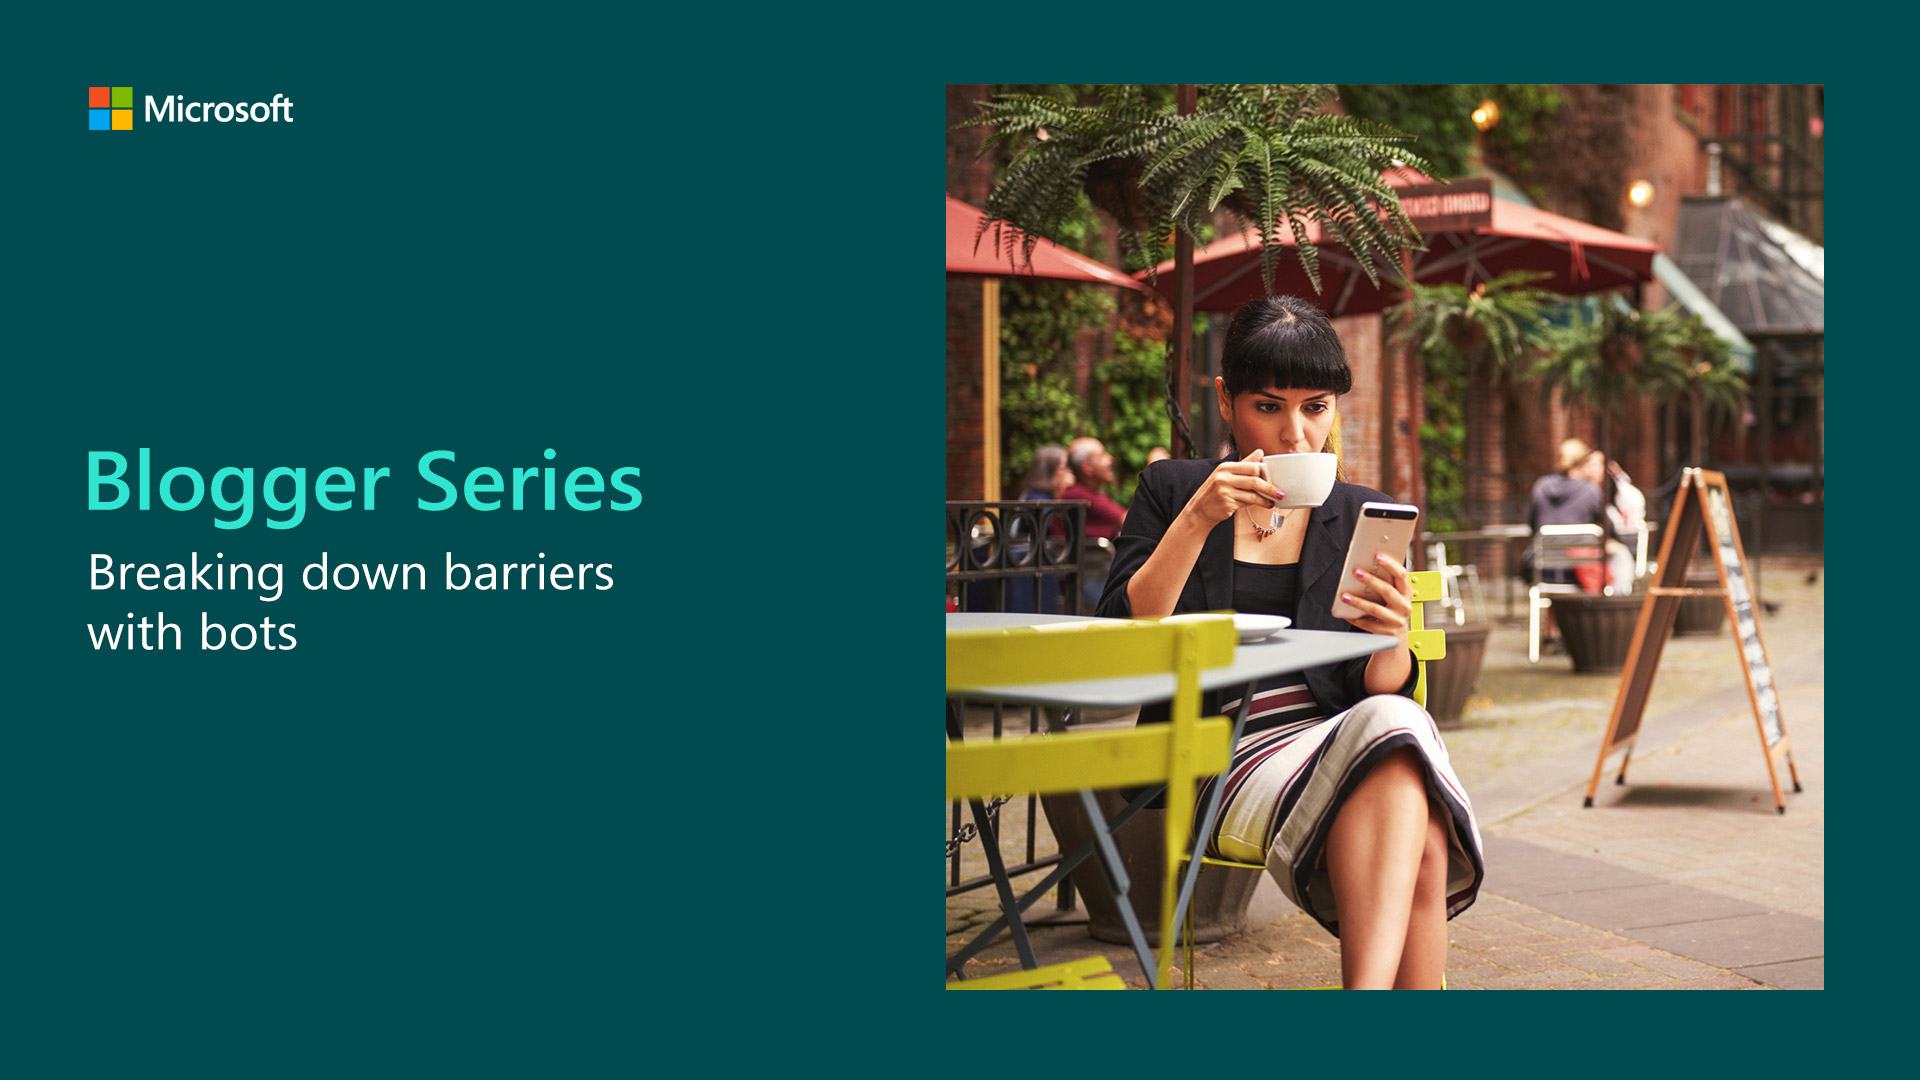 Microsoft Blogger Series banner showing woman on her phone whilst drinking coffee